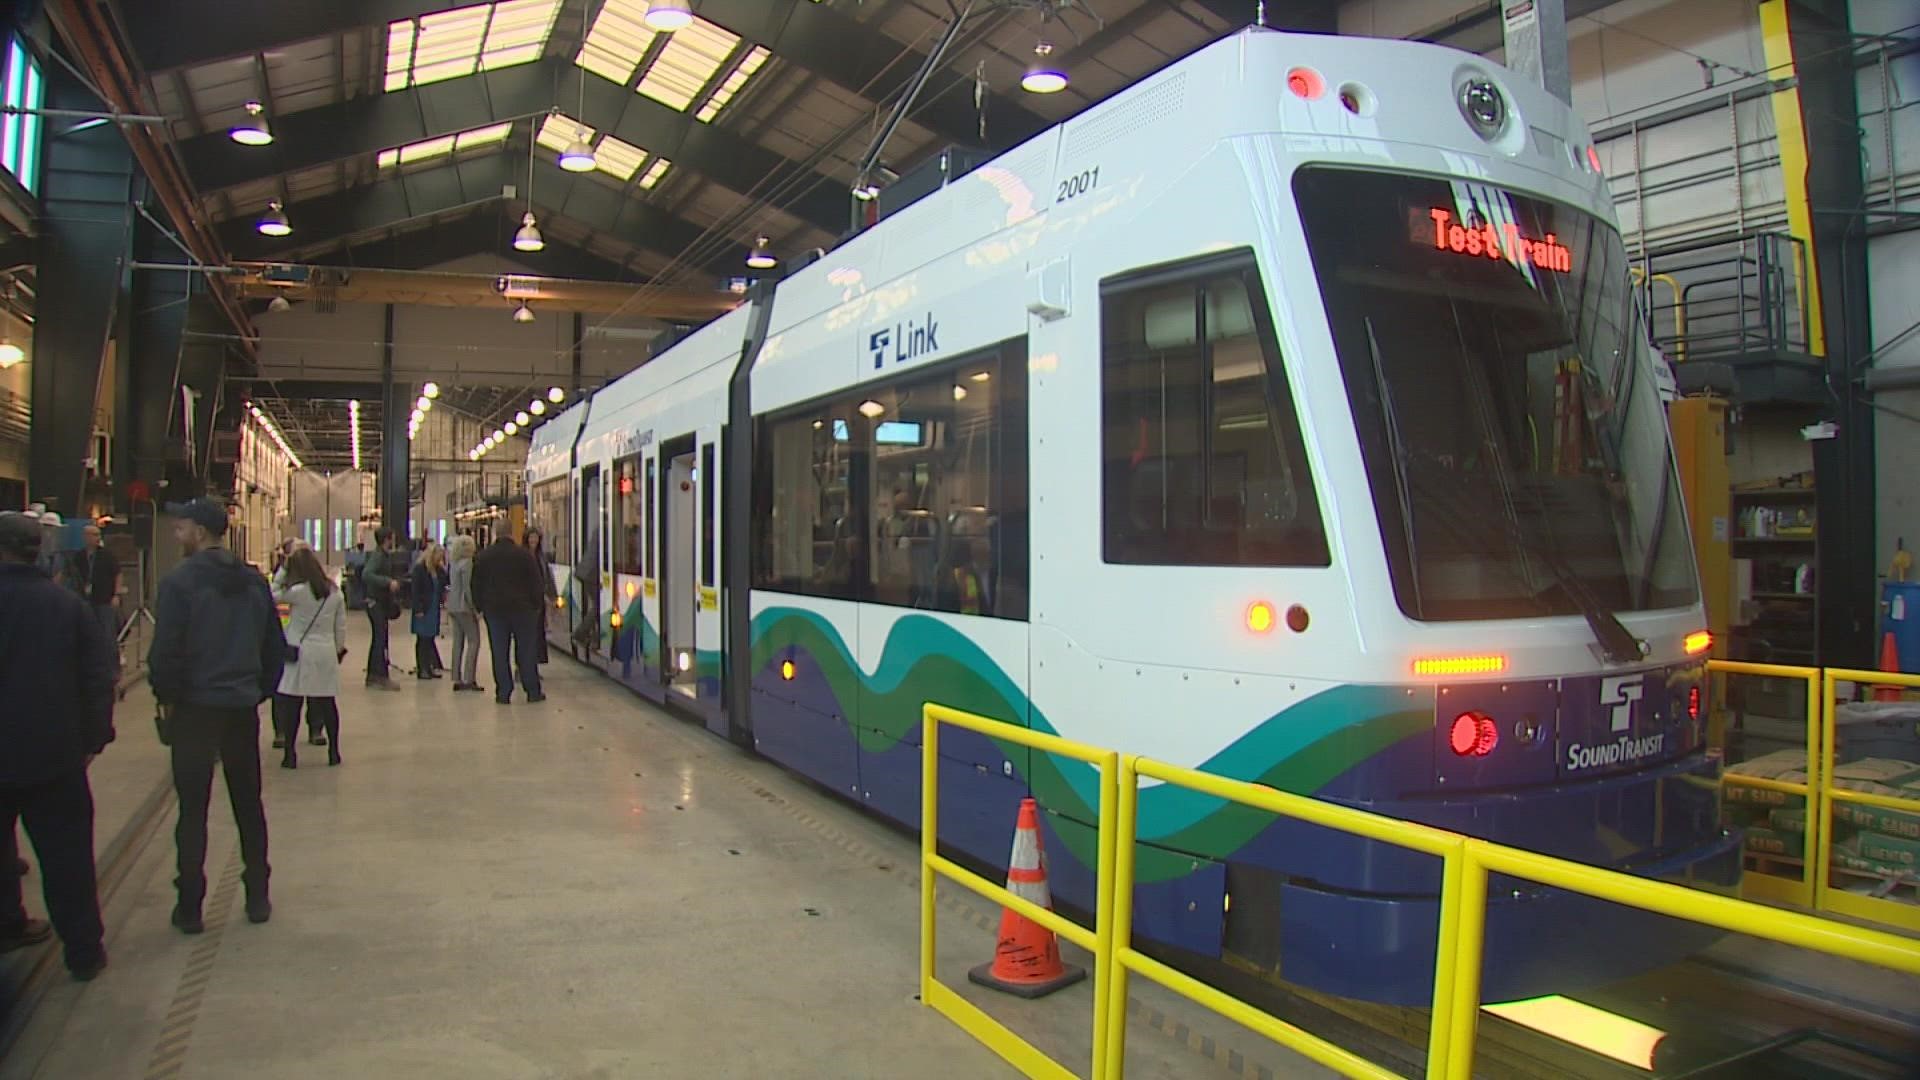 Sound Transit has received the first of the trains that will run on the Hilltop extension of Tacoma’s light rail system.